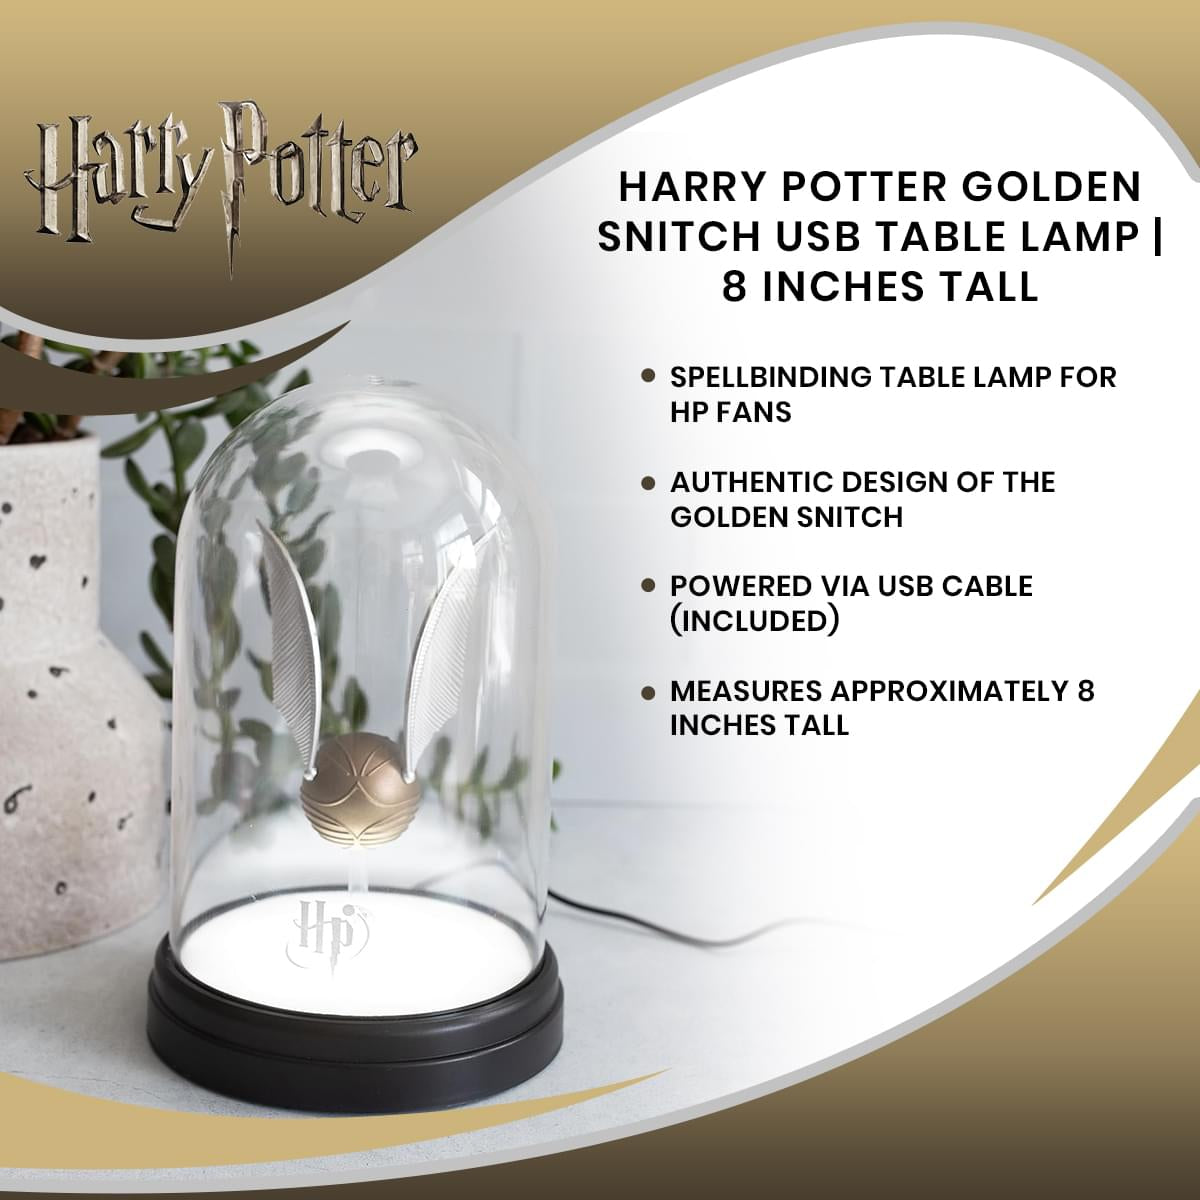 Harry Potter Golden Snitch USB Table Lamp | 8 Inches Tall